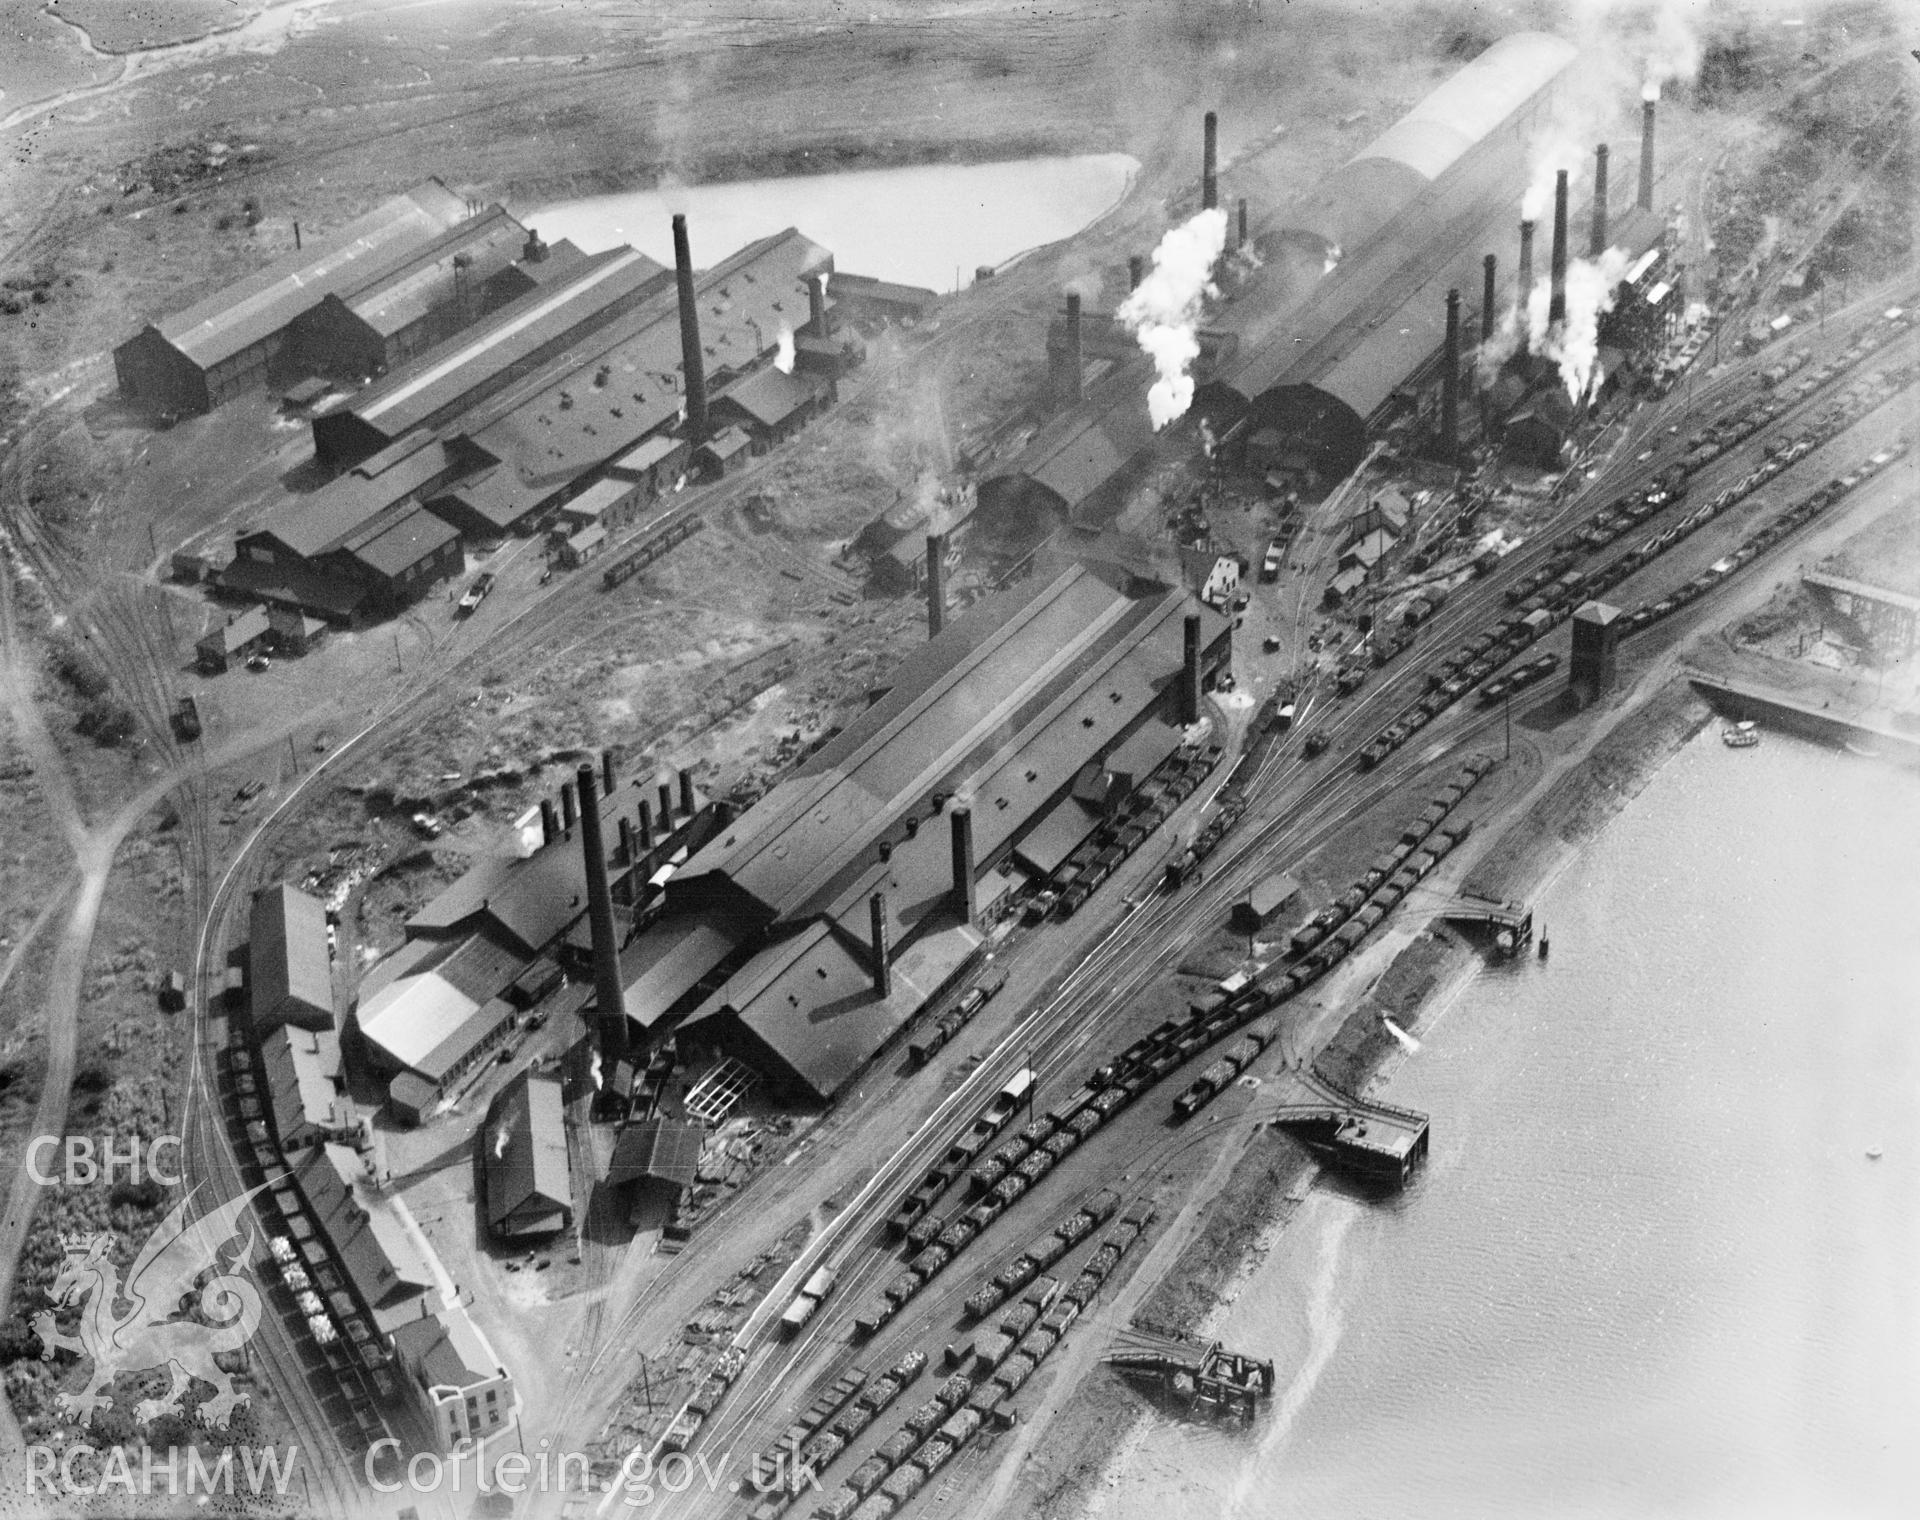 View of Baglan Bay tinplate works, Whitford and Albion works, Briton Ferry from the north, oblique aerial view. 5?x4? black and white glass plate negative.